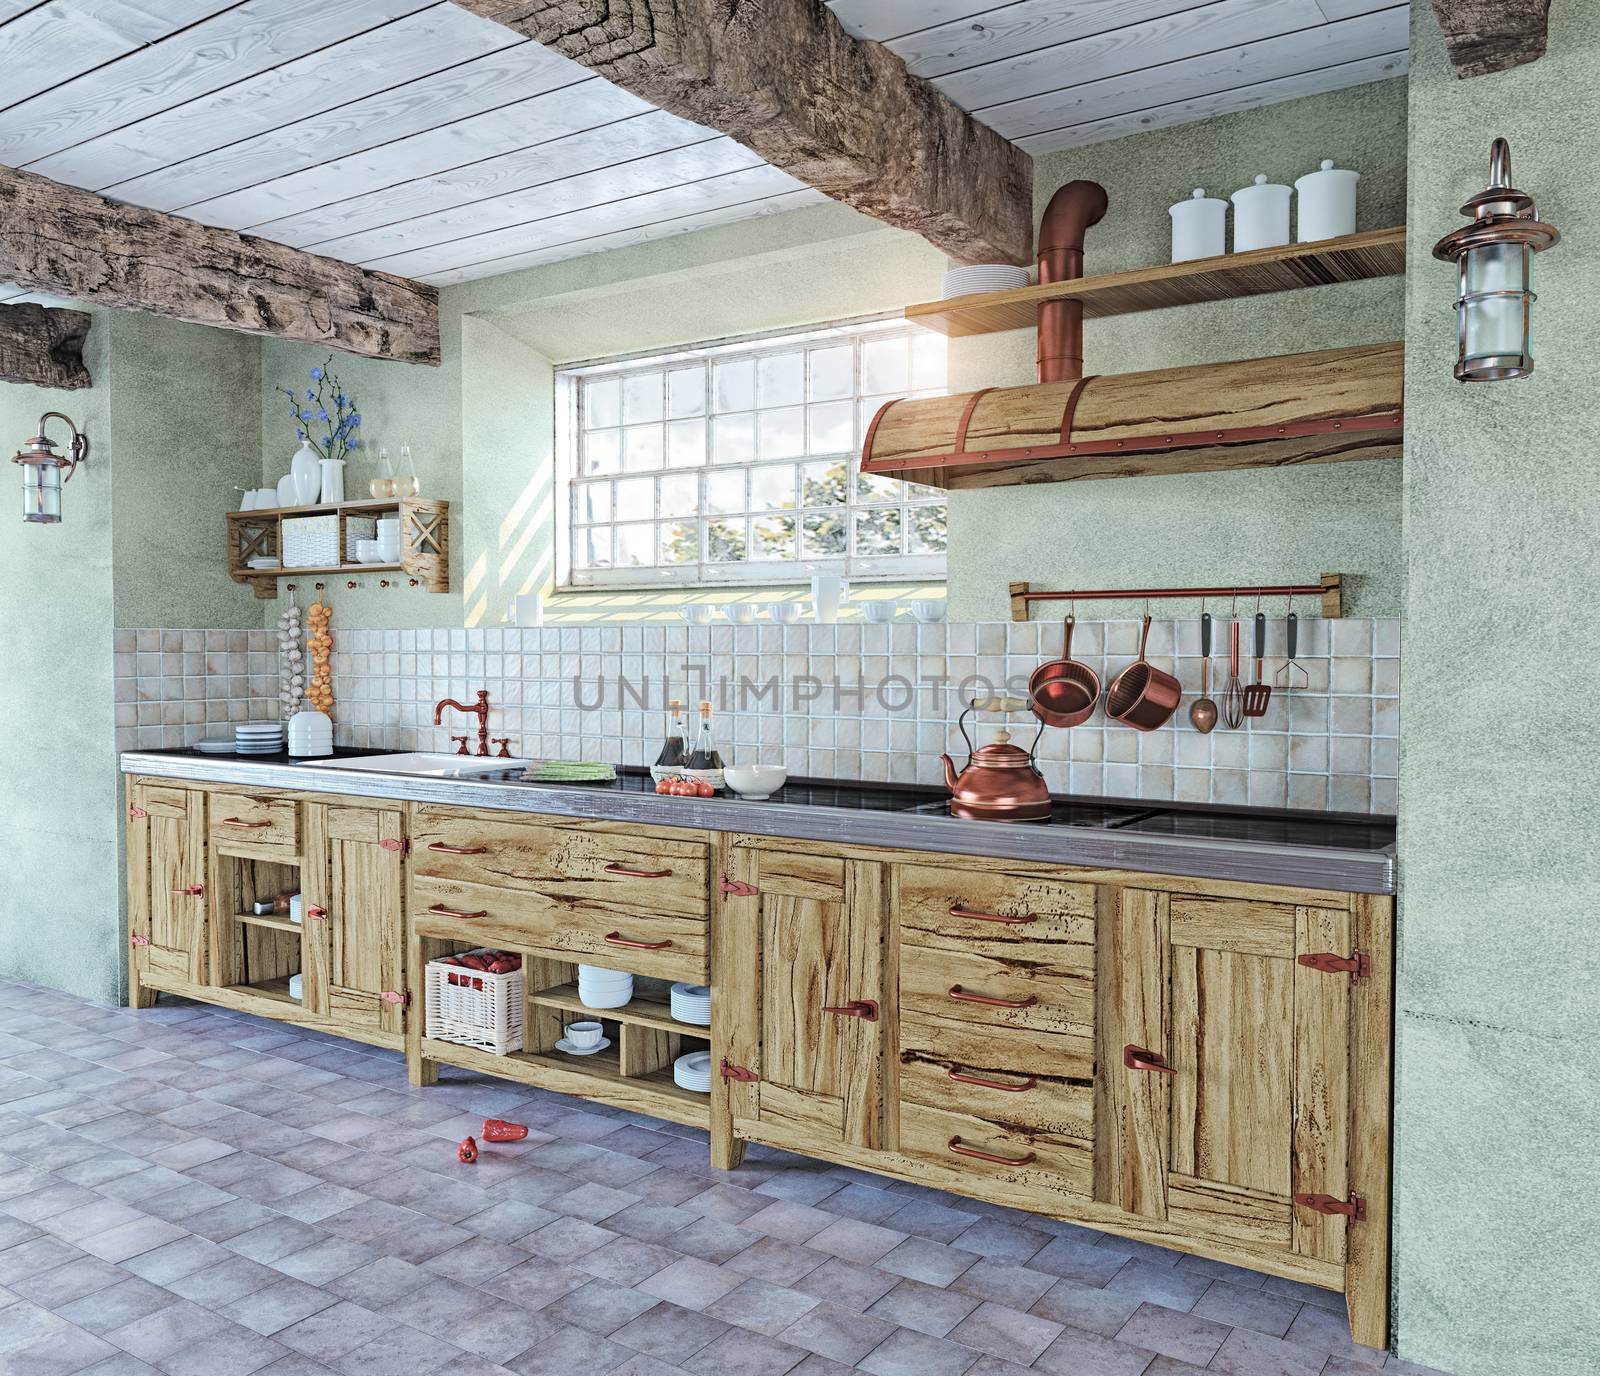 old-style kitchen interior by vicnt